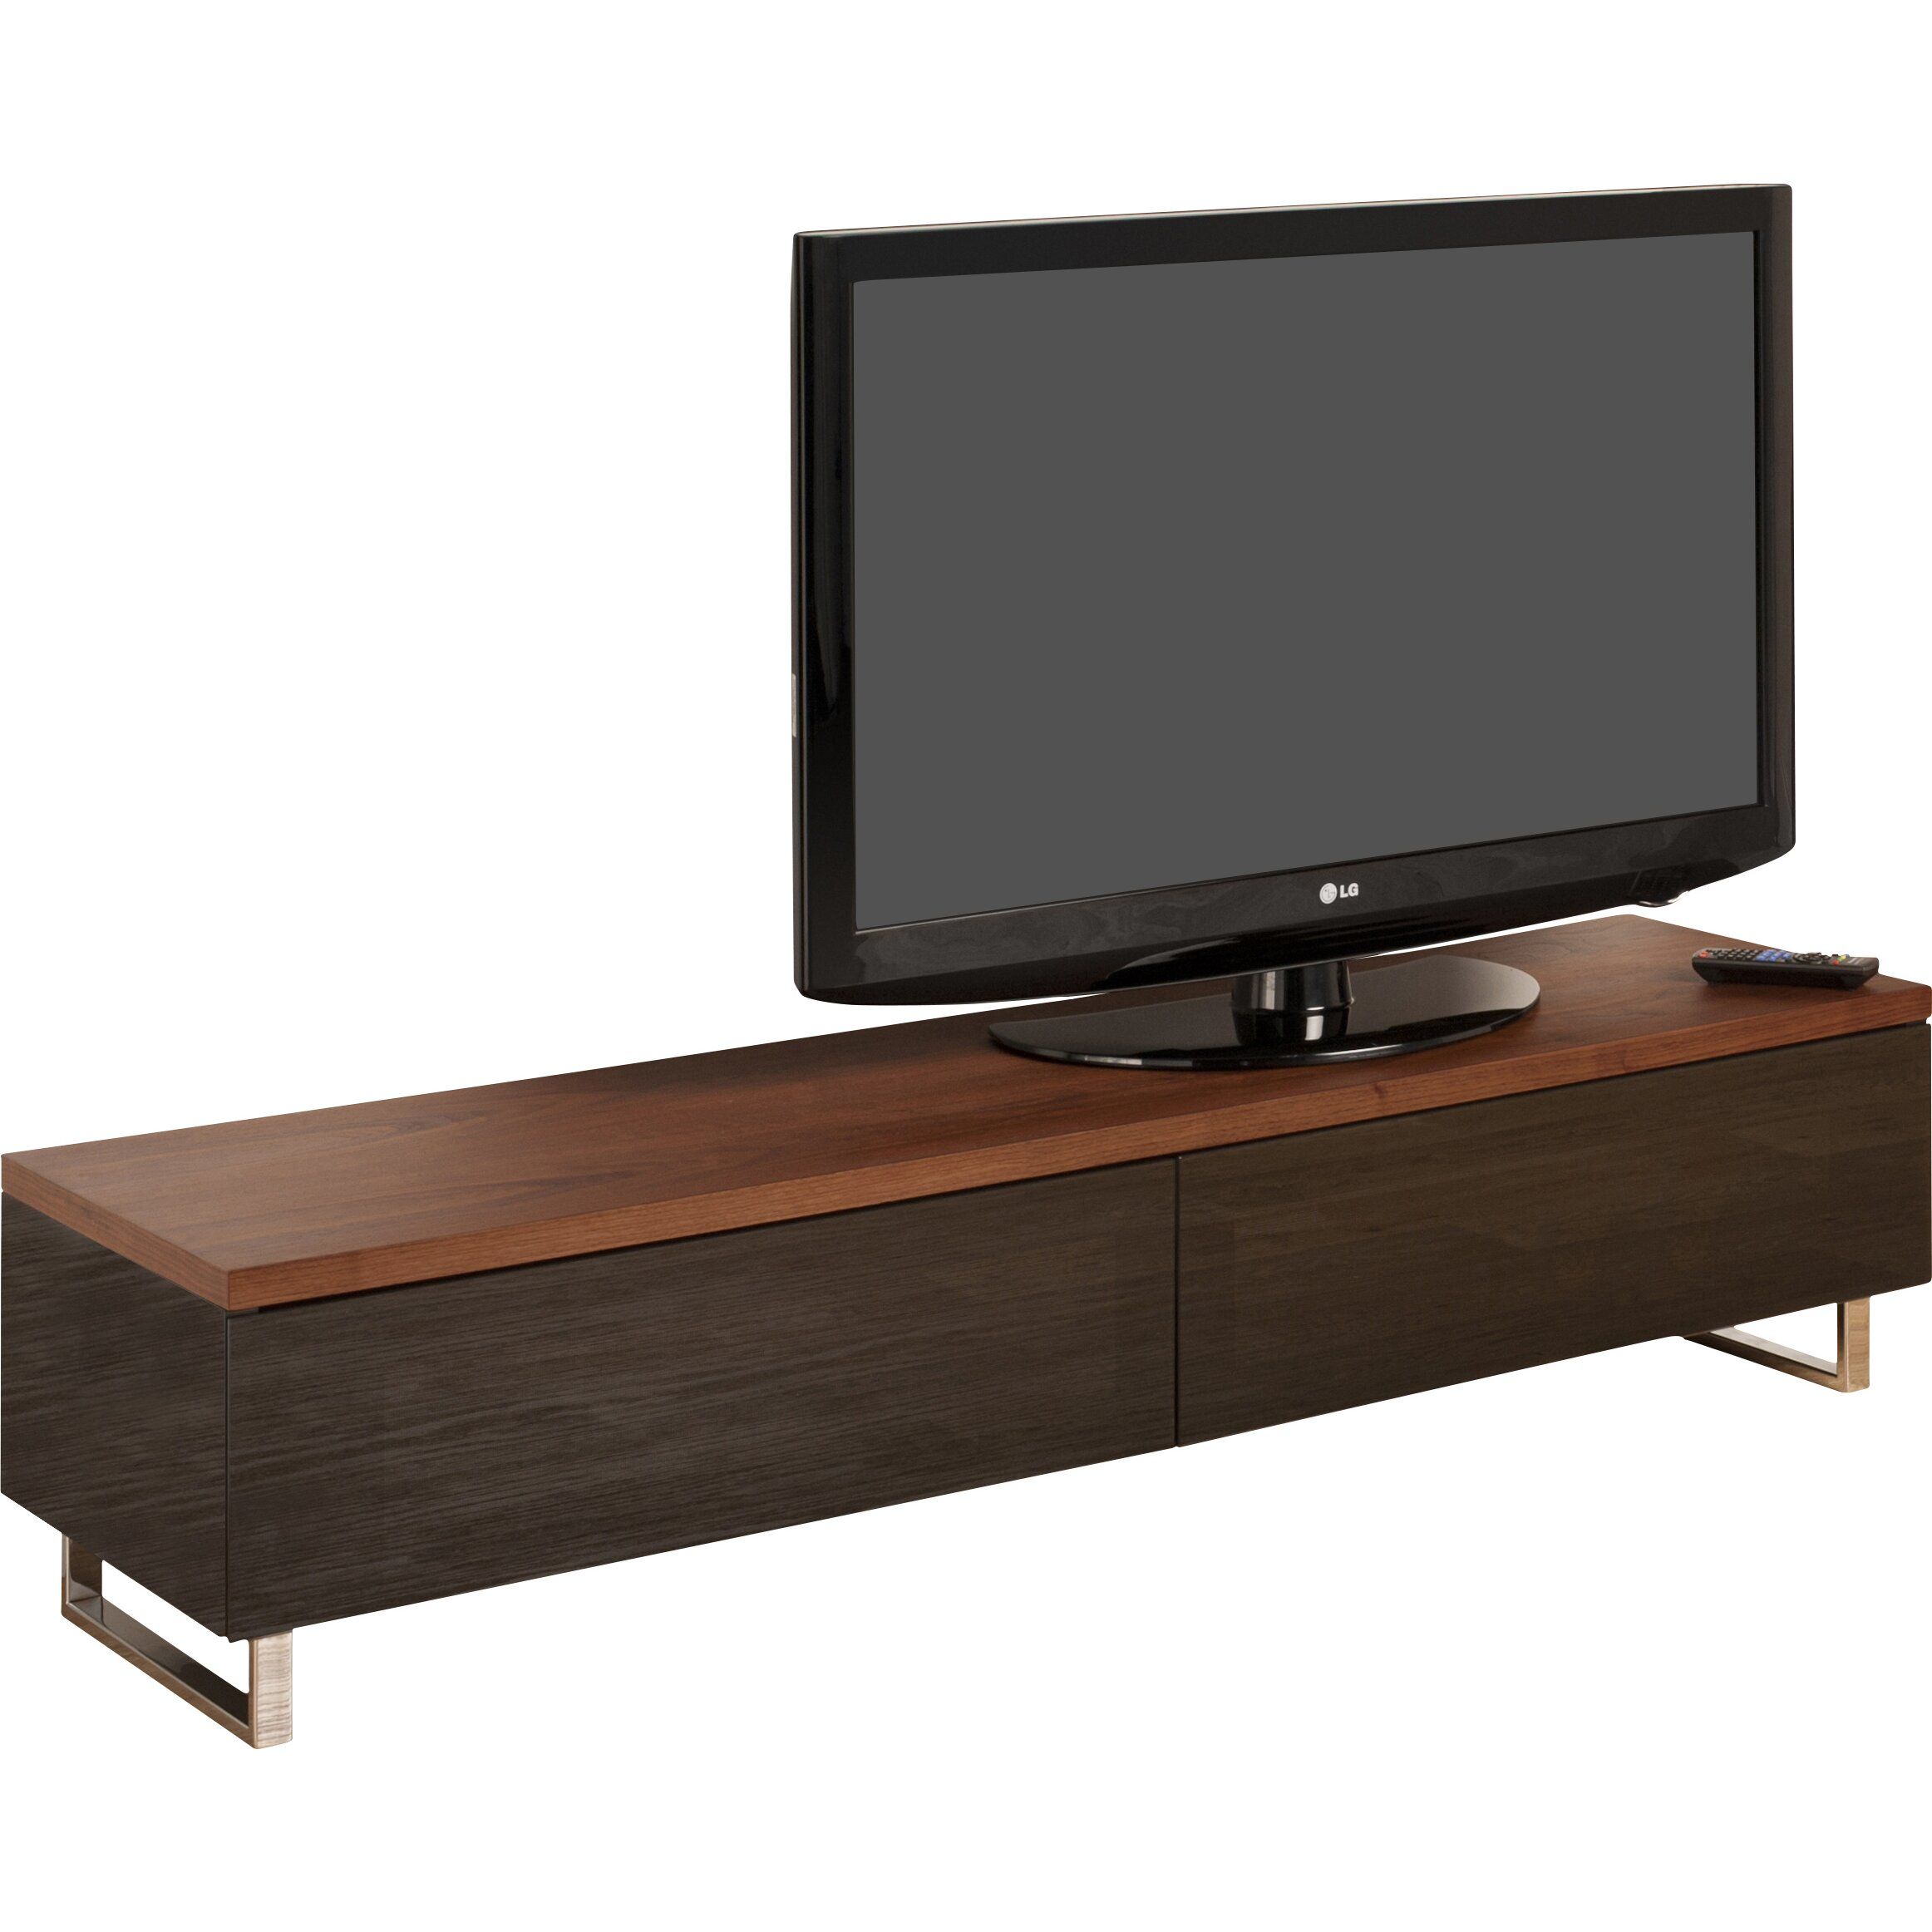 Techlink Panorama Tv Stand For Tvs Up To 61" & Reviews Throughout Techlink Arena Tv Stands (Photo 6 of 15)